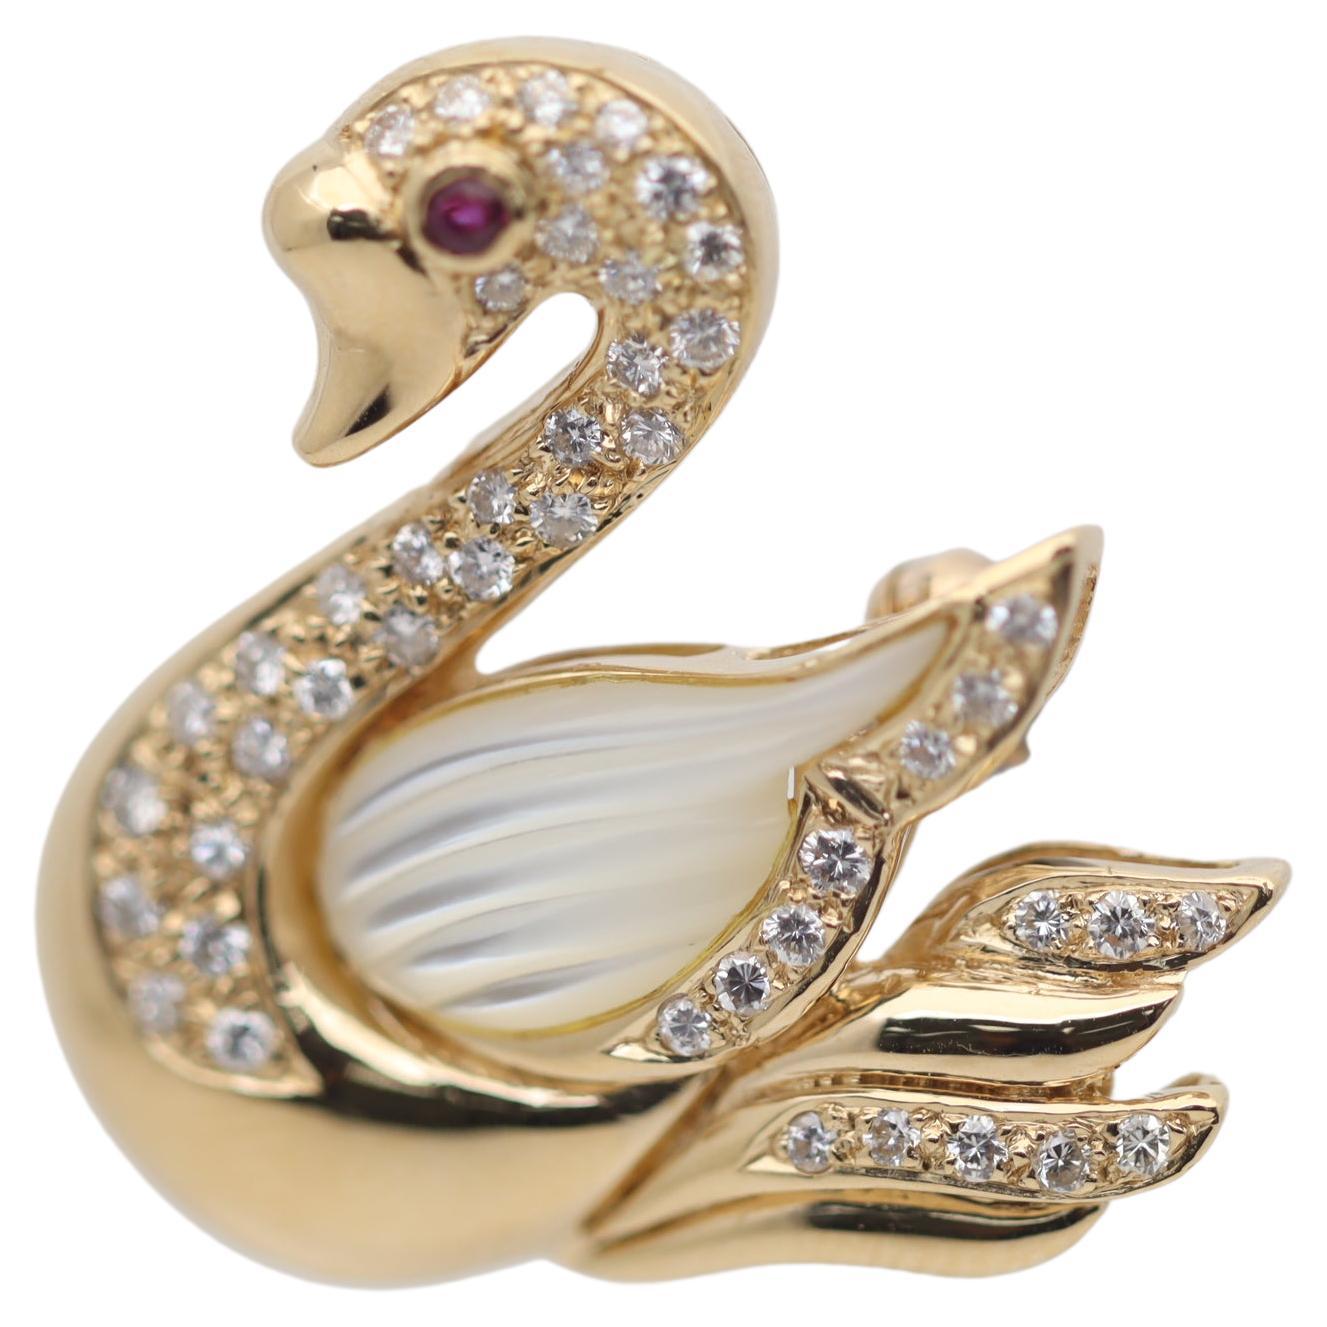 Diamond Ruby Mother-of-Pearl Gold Swan Brooch Pin